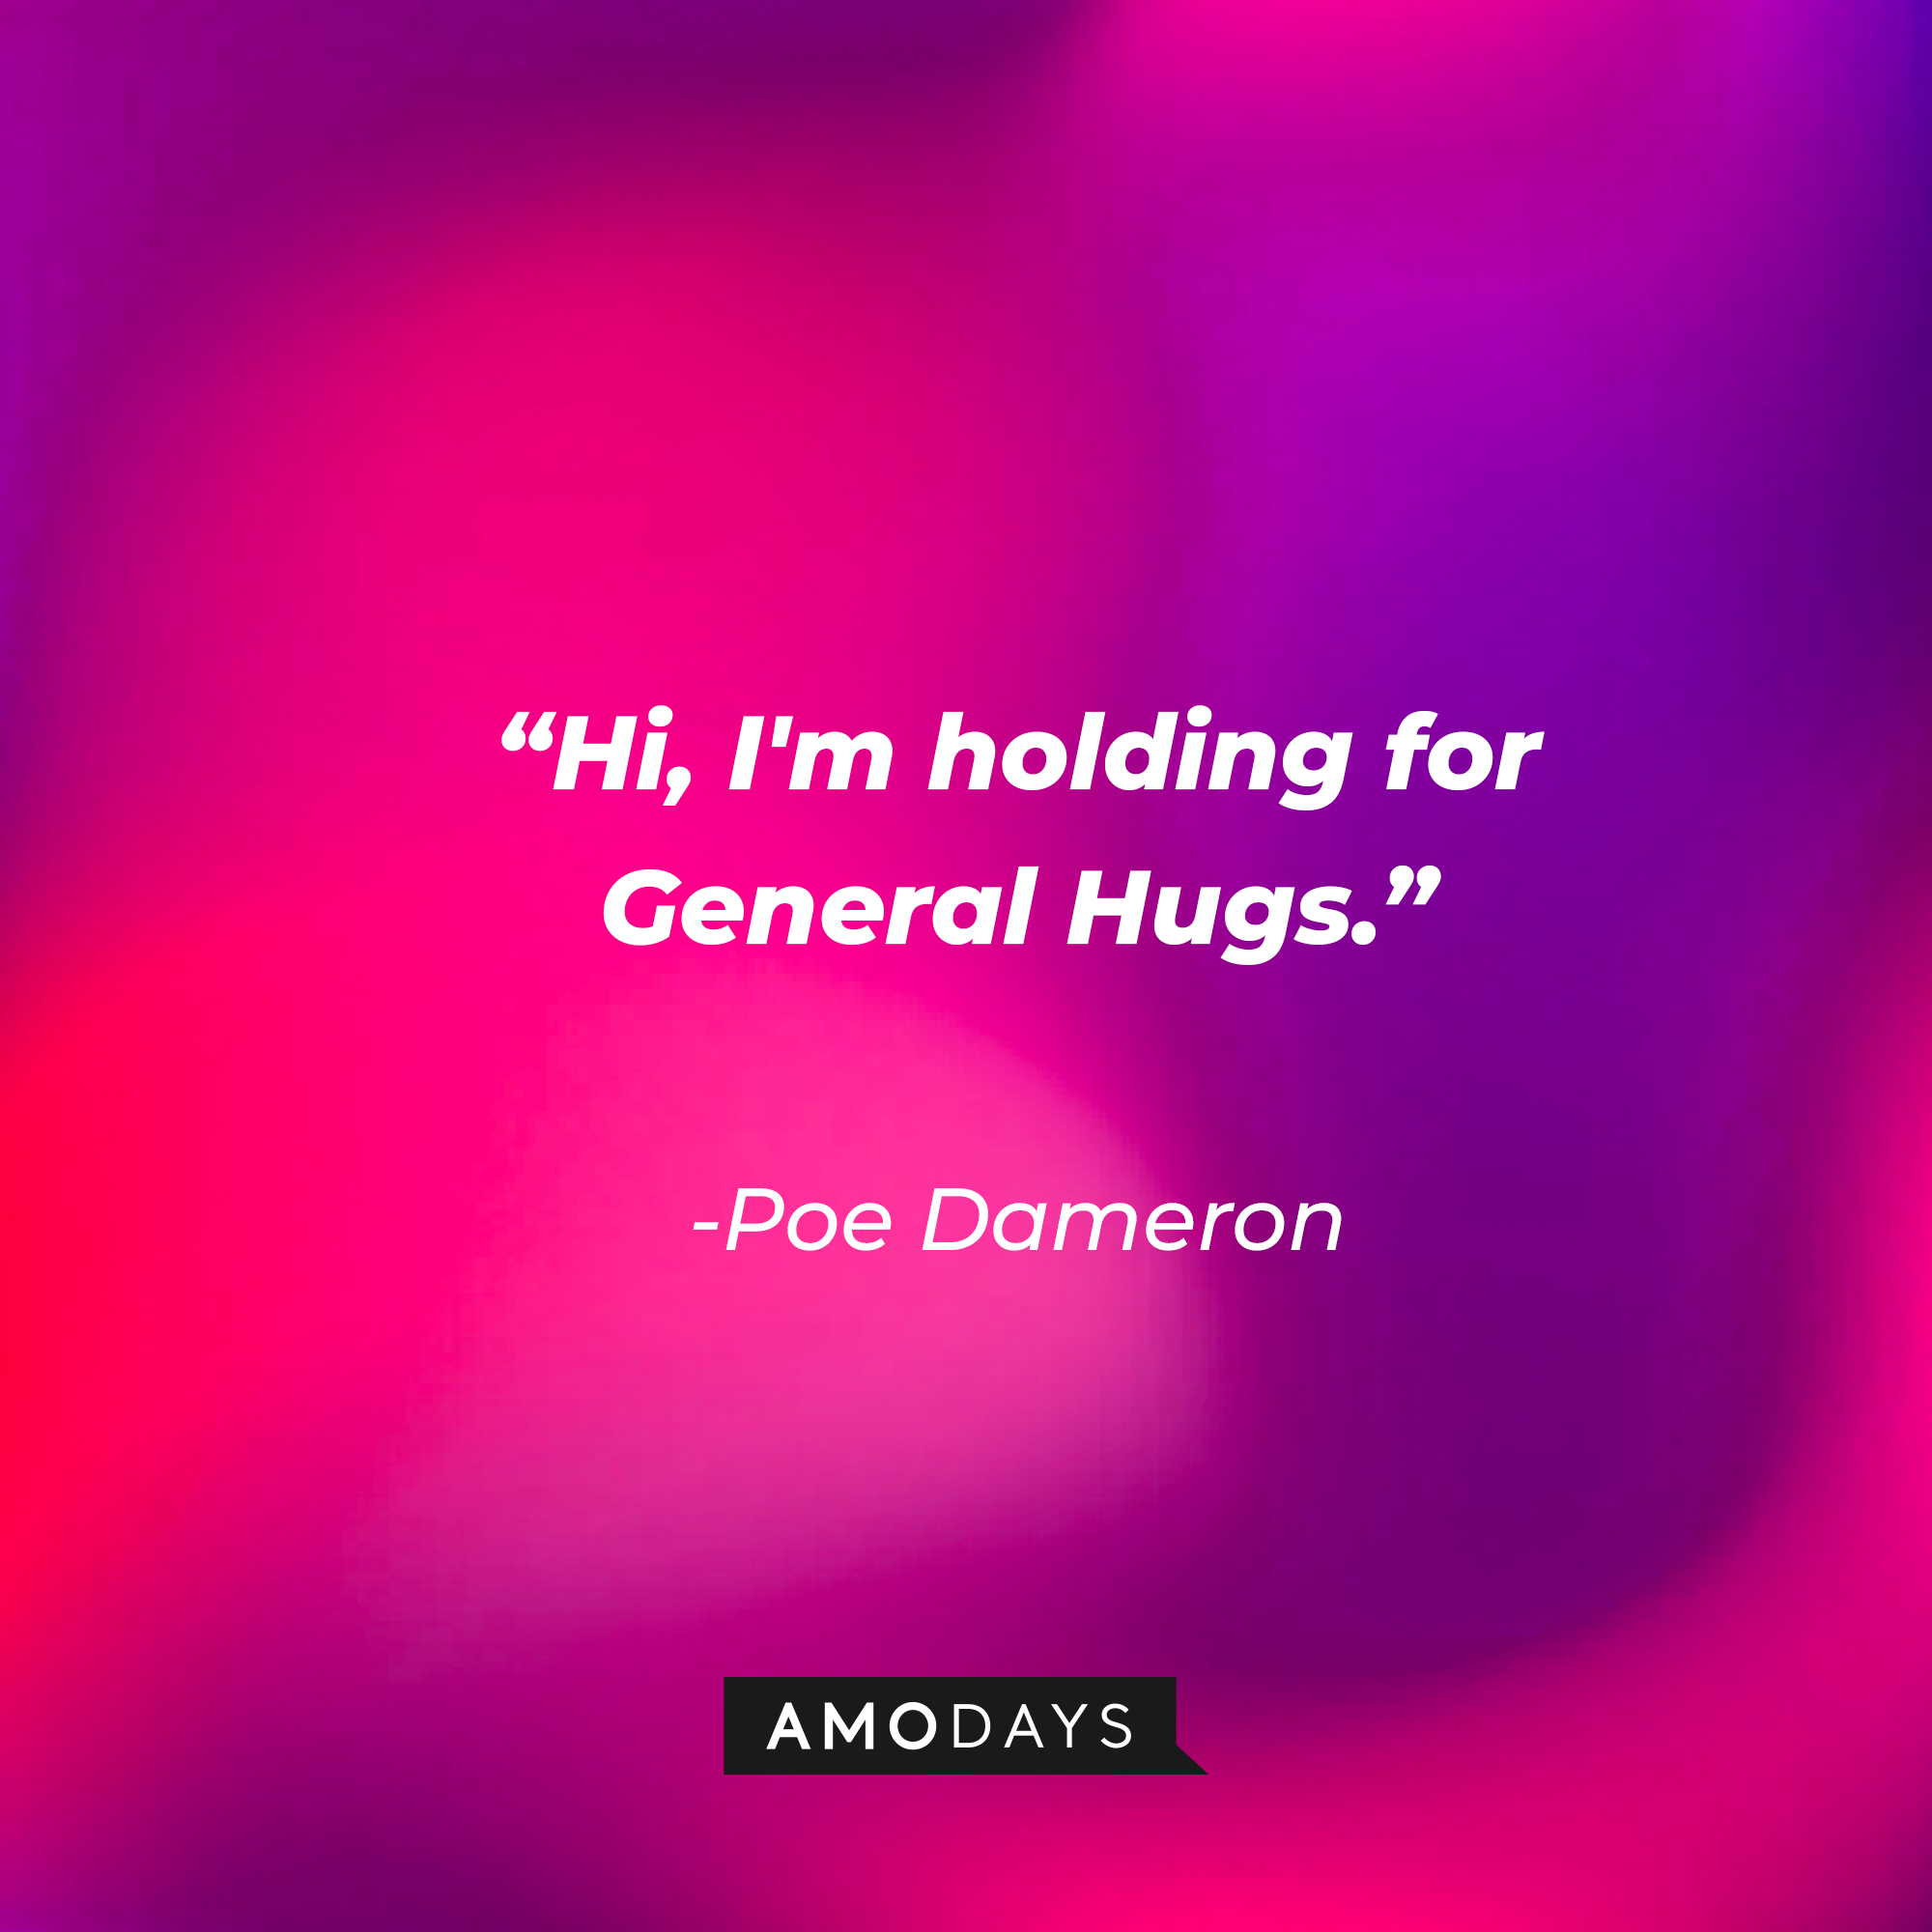 Poe Dameron’s quote: “Hi, I'm holding for General Hugs.” | Source: AmoDays